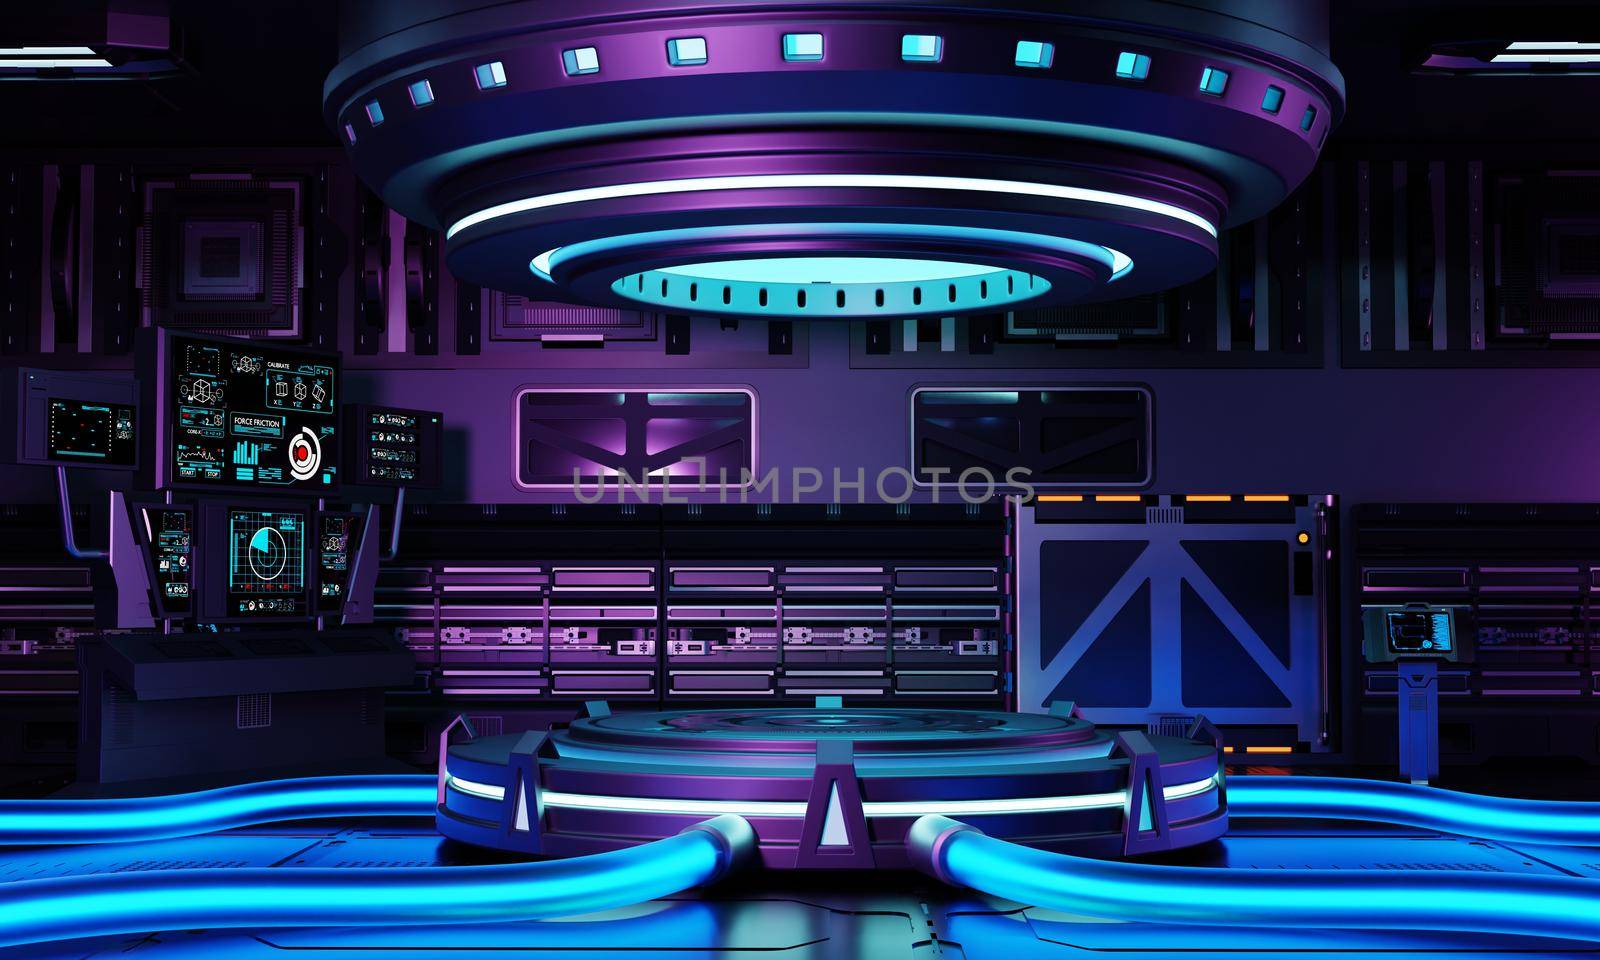 Cyberpunk sci-fi product podium showcase in spaceship with blue purple and pink background. Technology and object concept. 3D illustration rendering